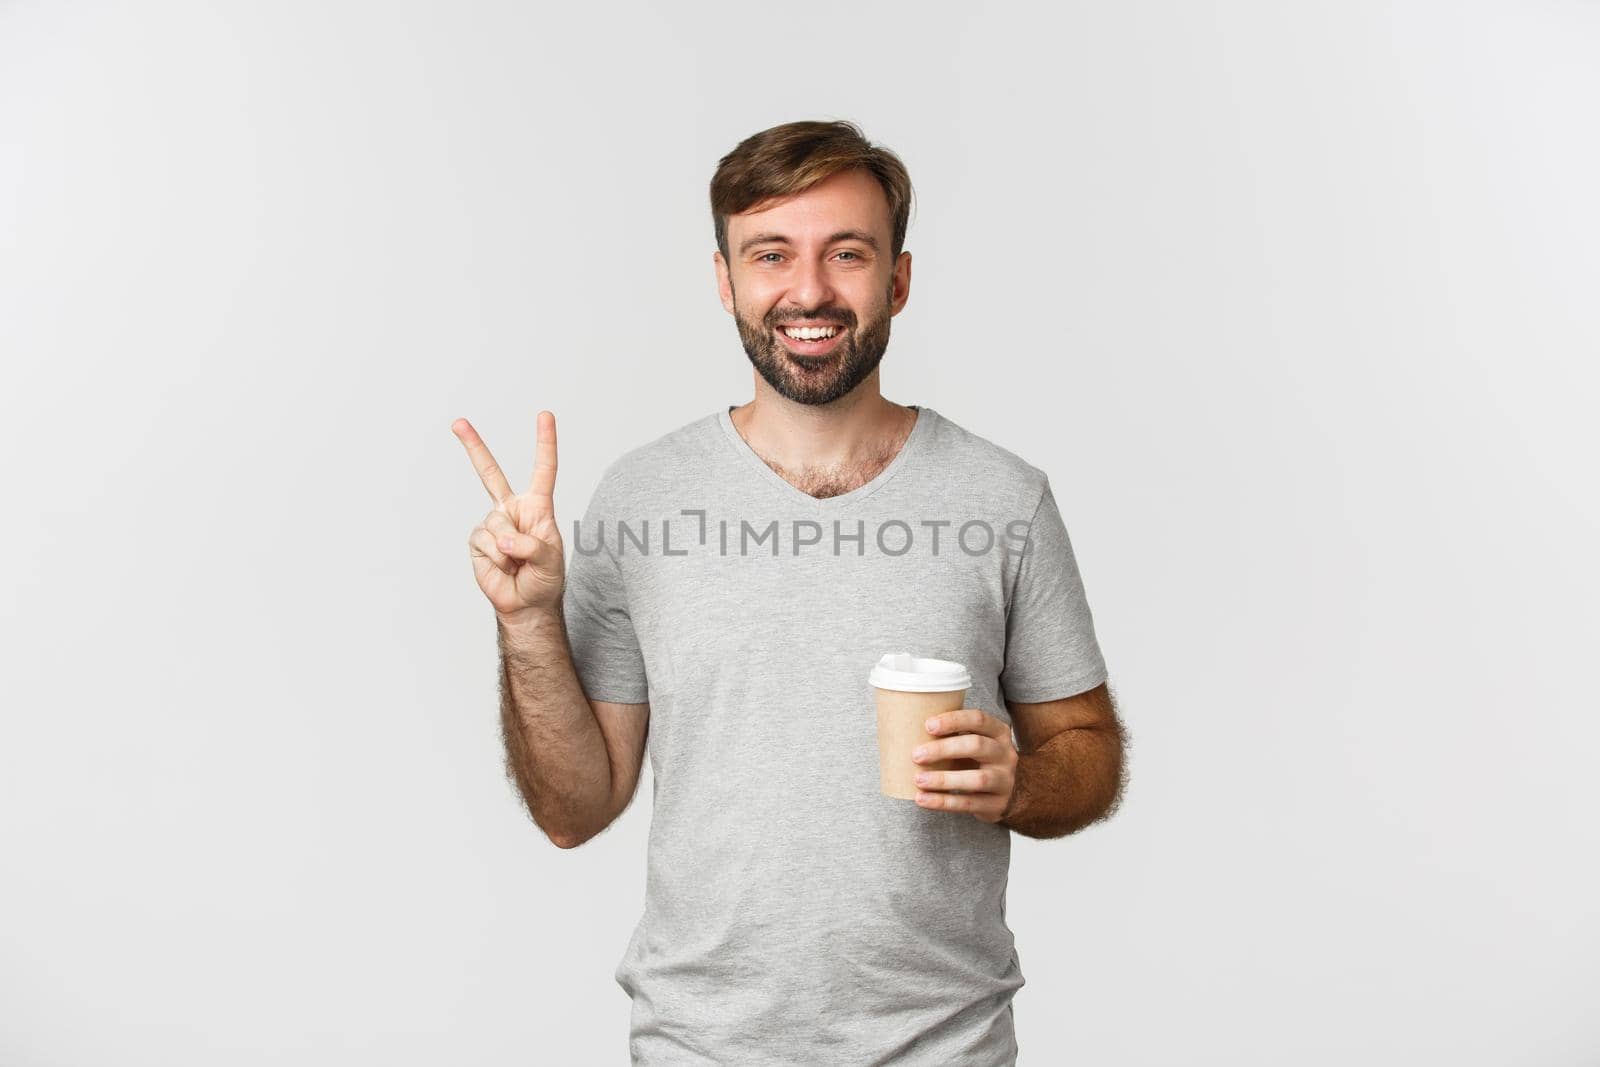 Image of happy guy drinking takeaway coffee, showing peace sign and smiling, standing over white background.